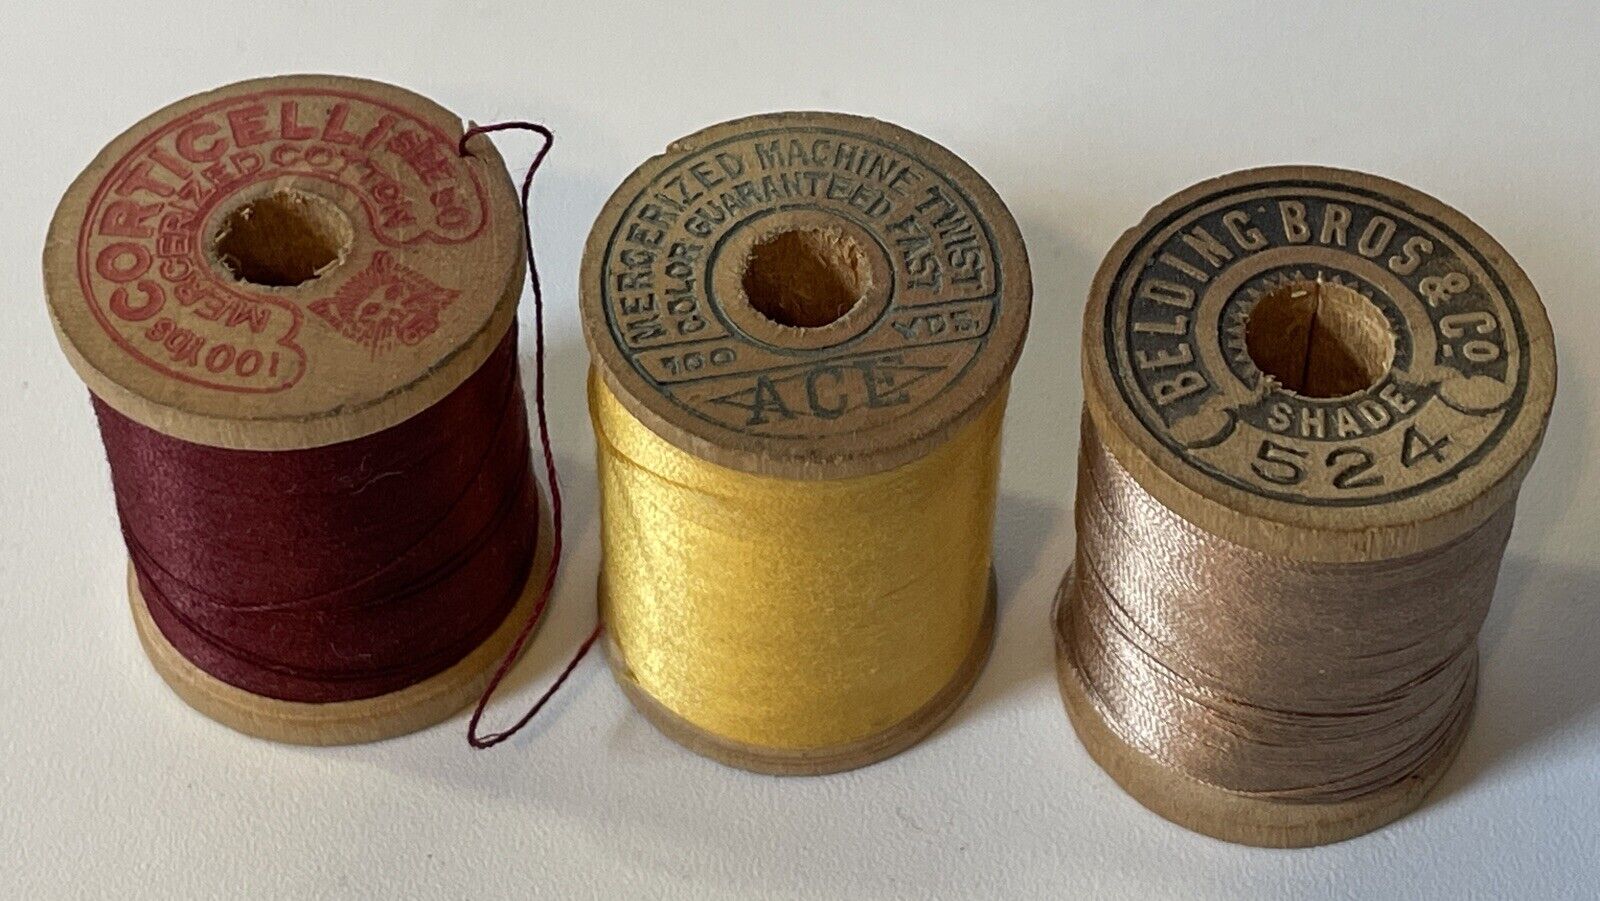 Set Of 3 Vint Wooden Spools Of Thread Corticelli, Belding Bros., Ace